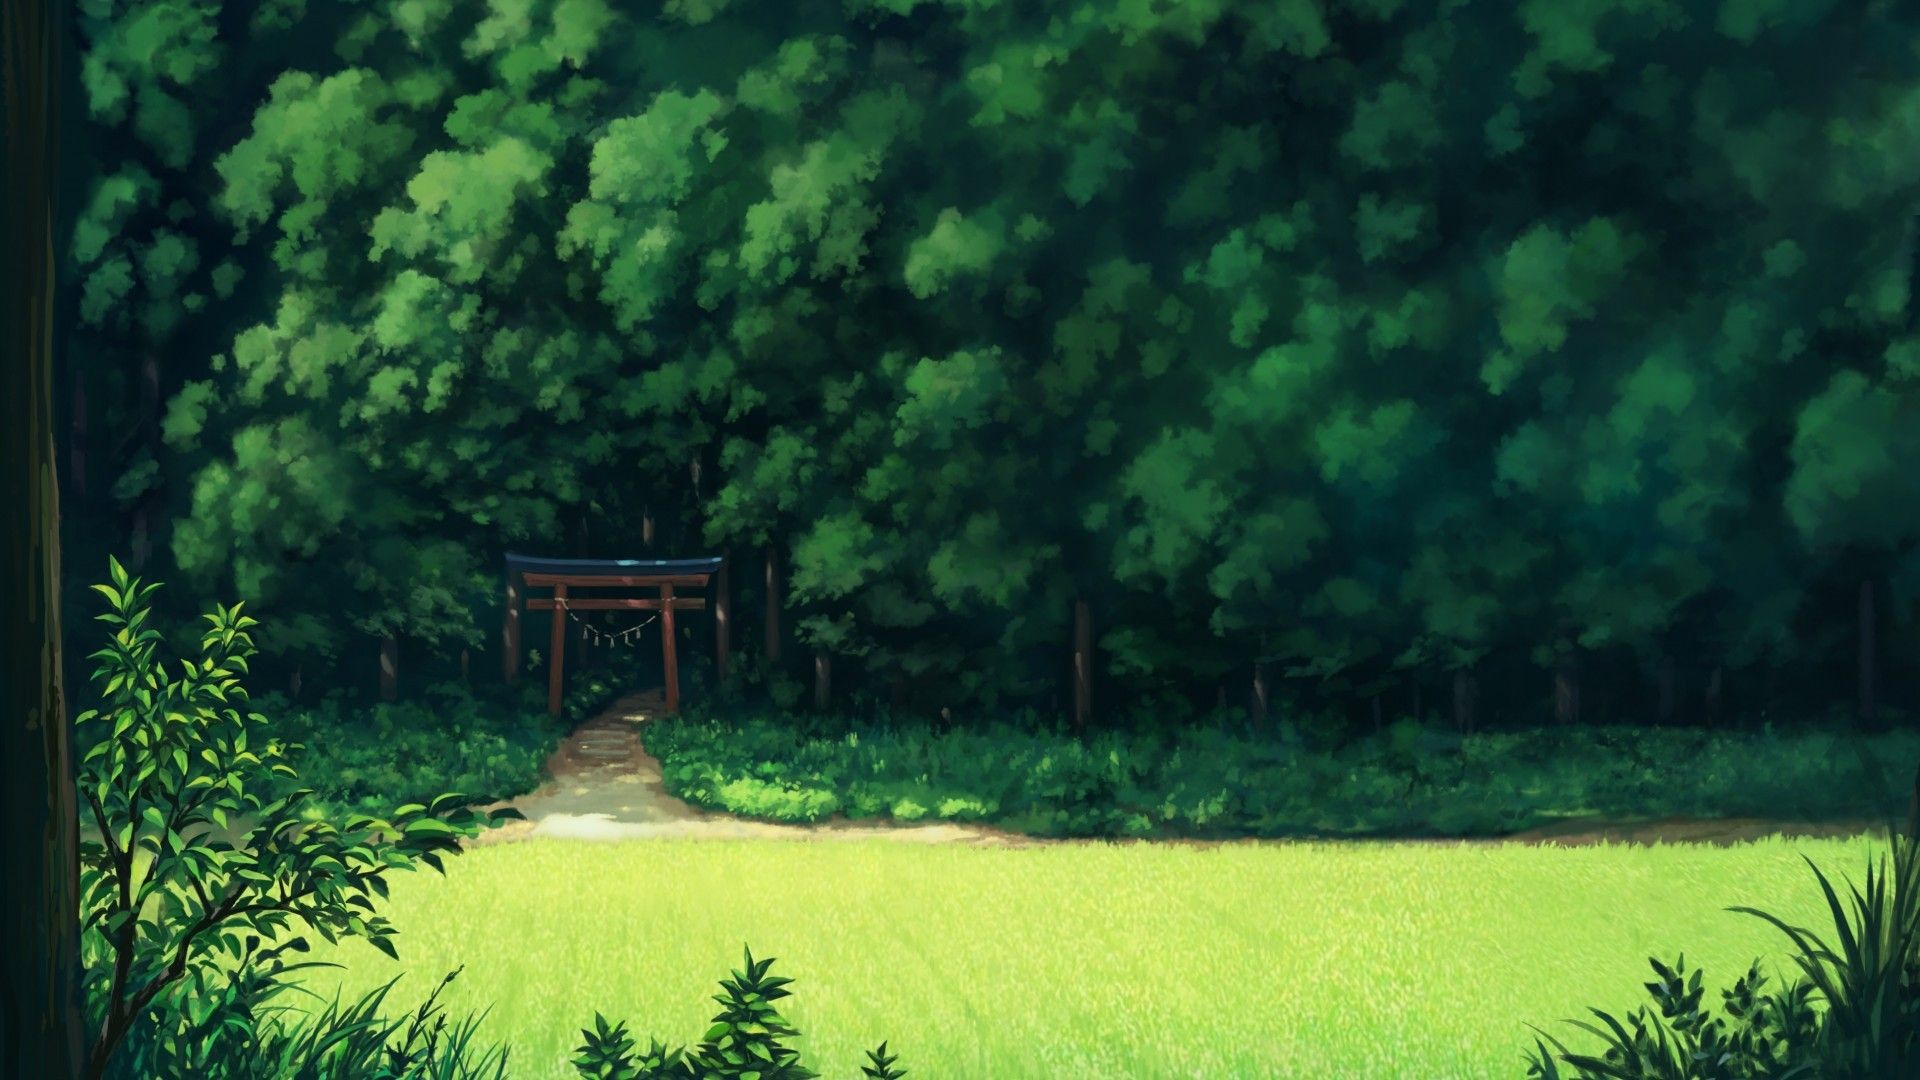 Download 1920x1080 Anime Landscape, Forest, Trees, Grass, Path, Scenic Wallpaper for Widescreen